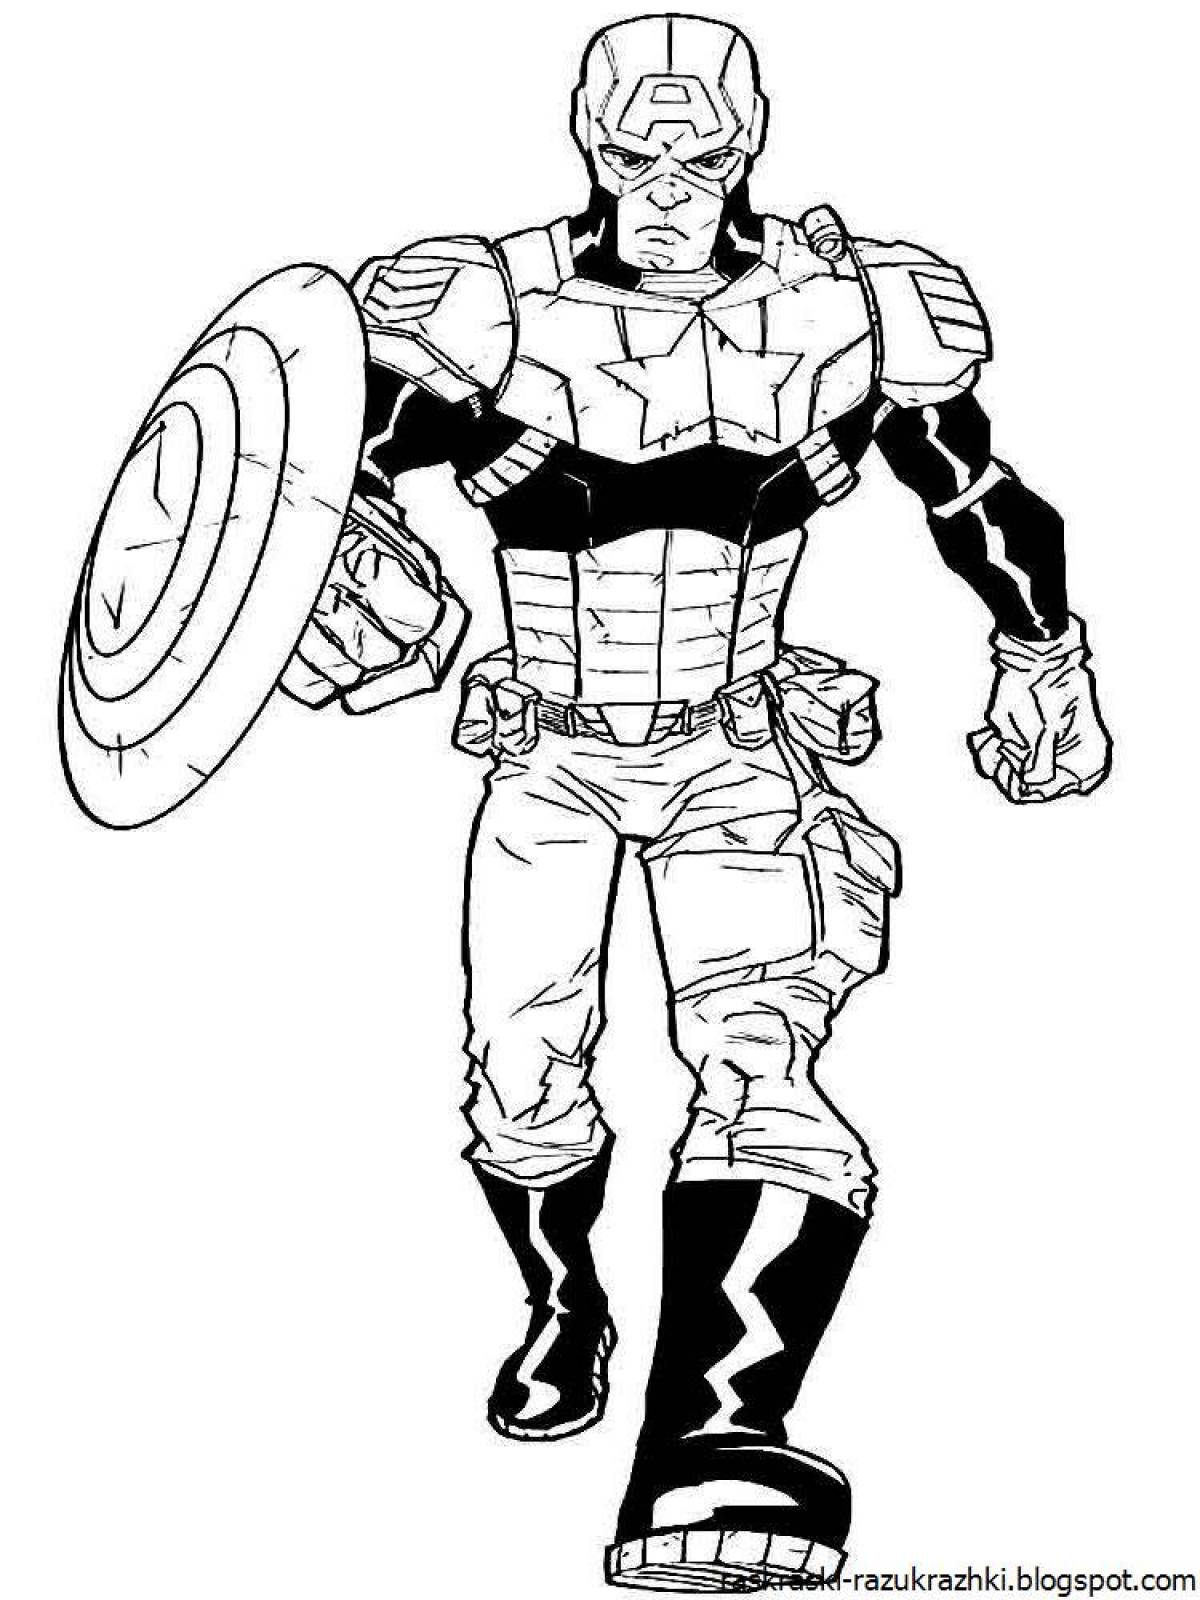 Superhero coloring pages for boys